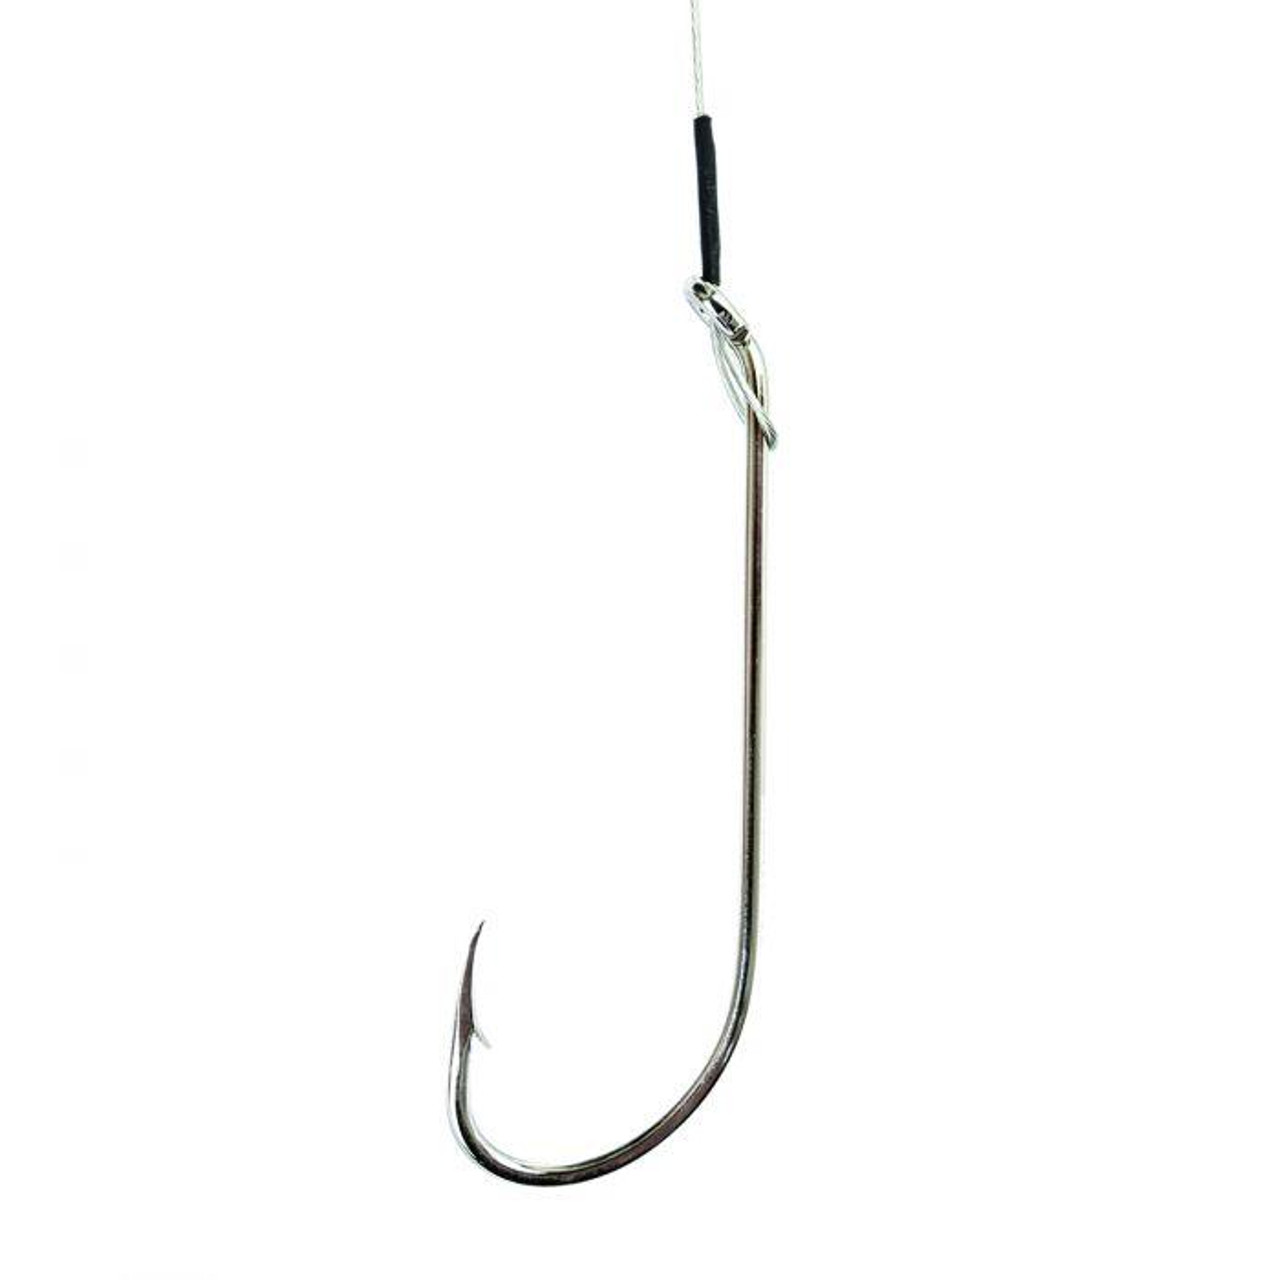 Eagle Claw Long Plain Shank Nylawire Snell Hook - 5 Pack - Dance's Sporting  Goods